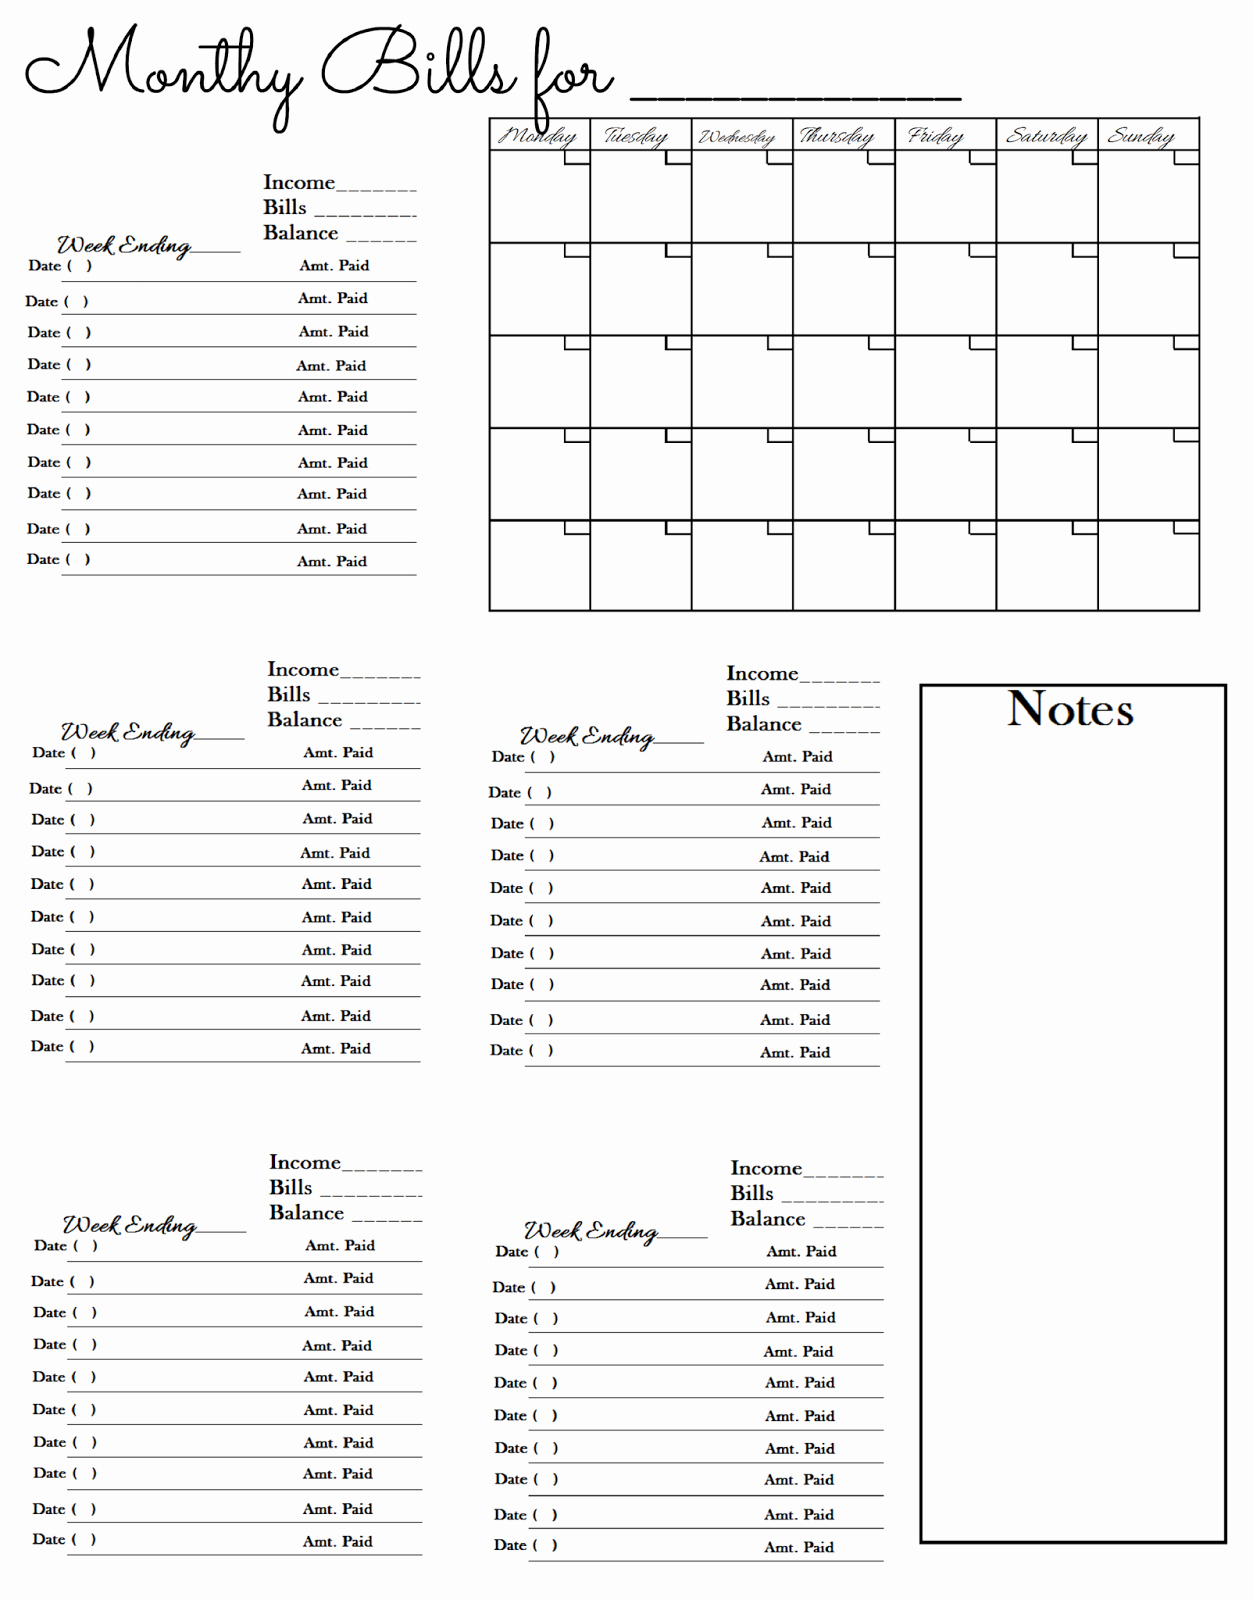 Bill Pay Spreadsheet Template Inspirational Glenda S World Worksheet to Keep Track Of Paid Monthly Bills